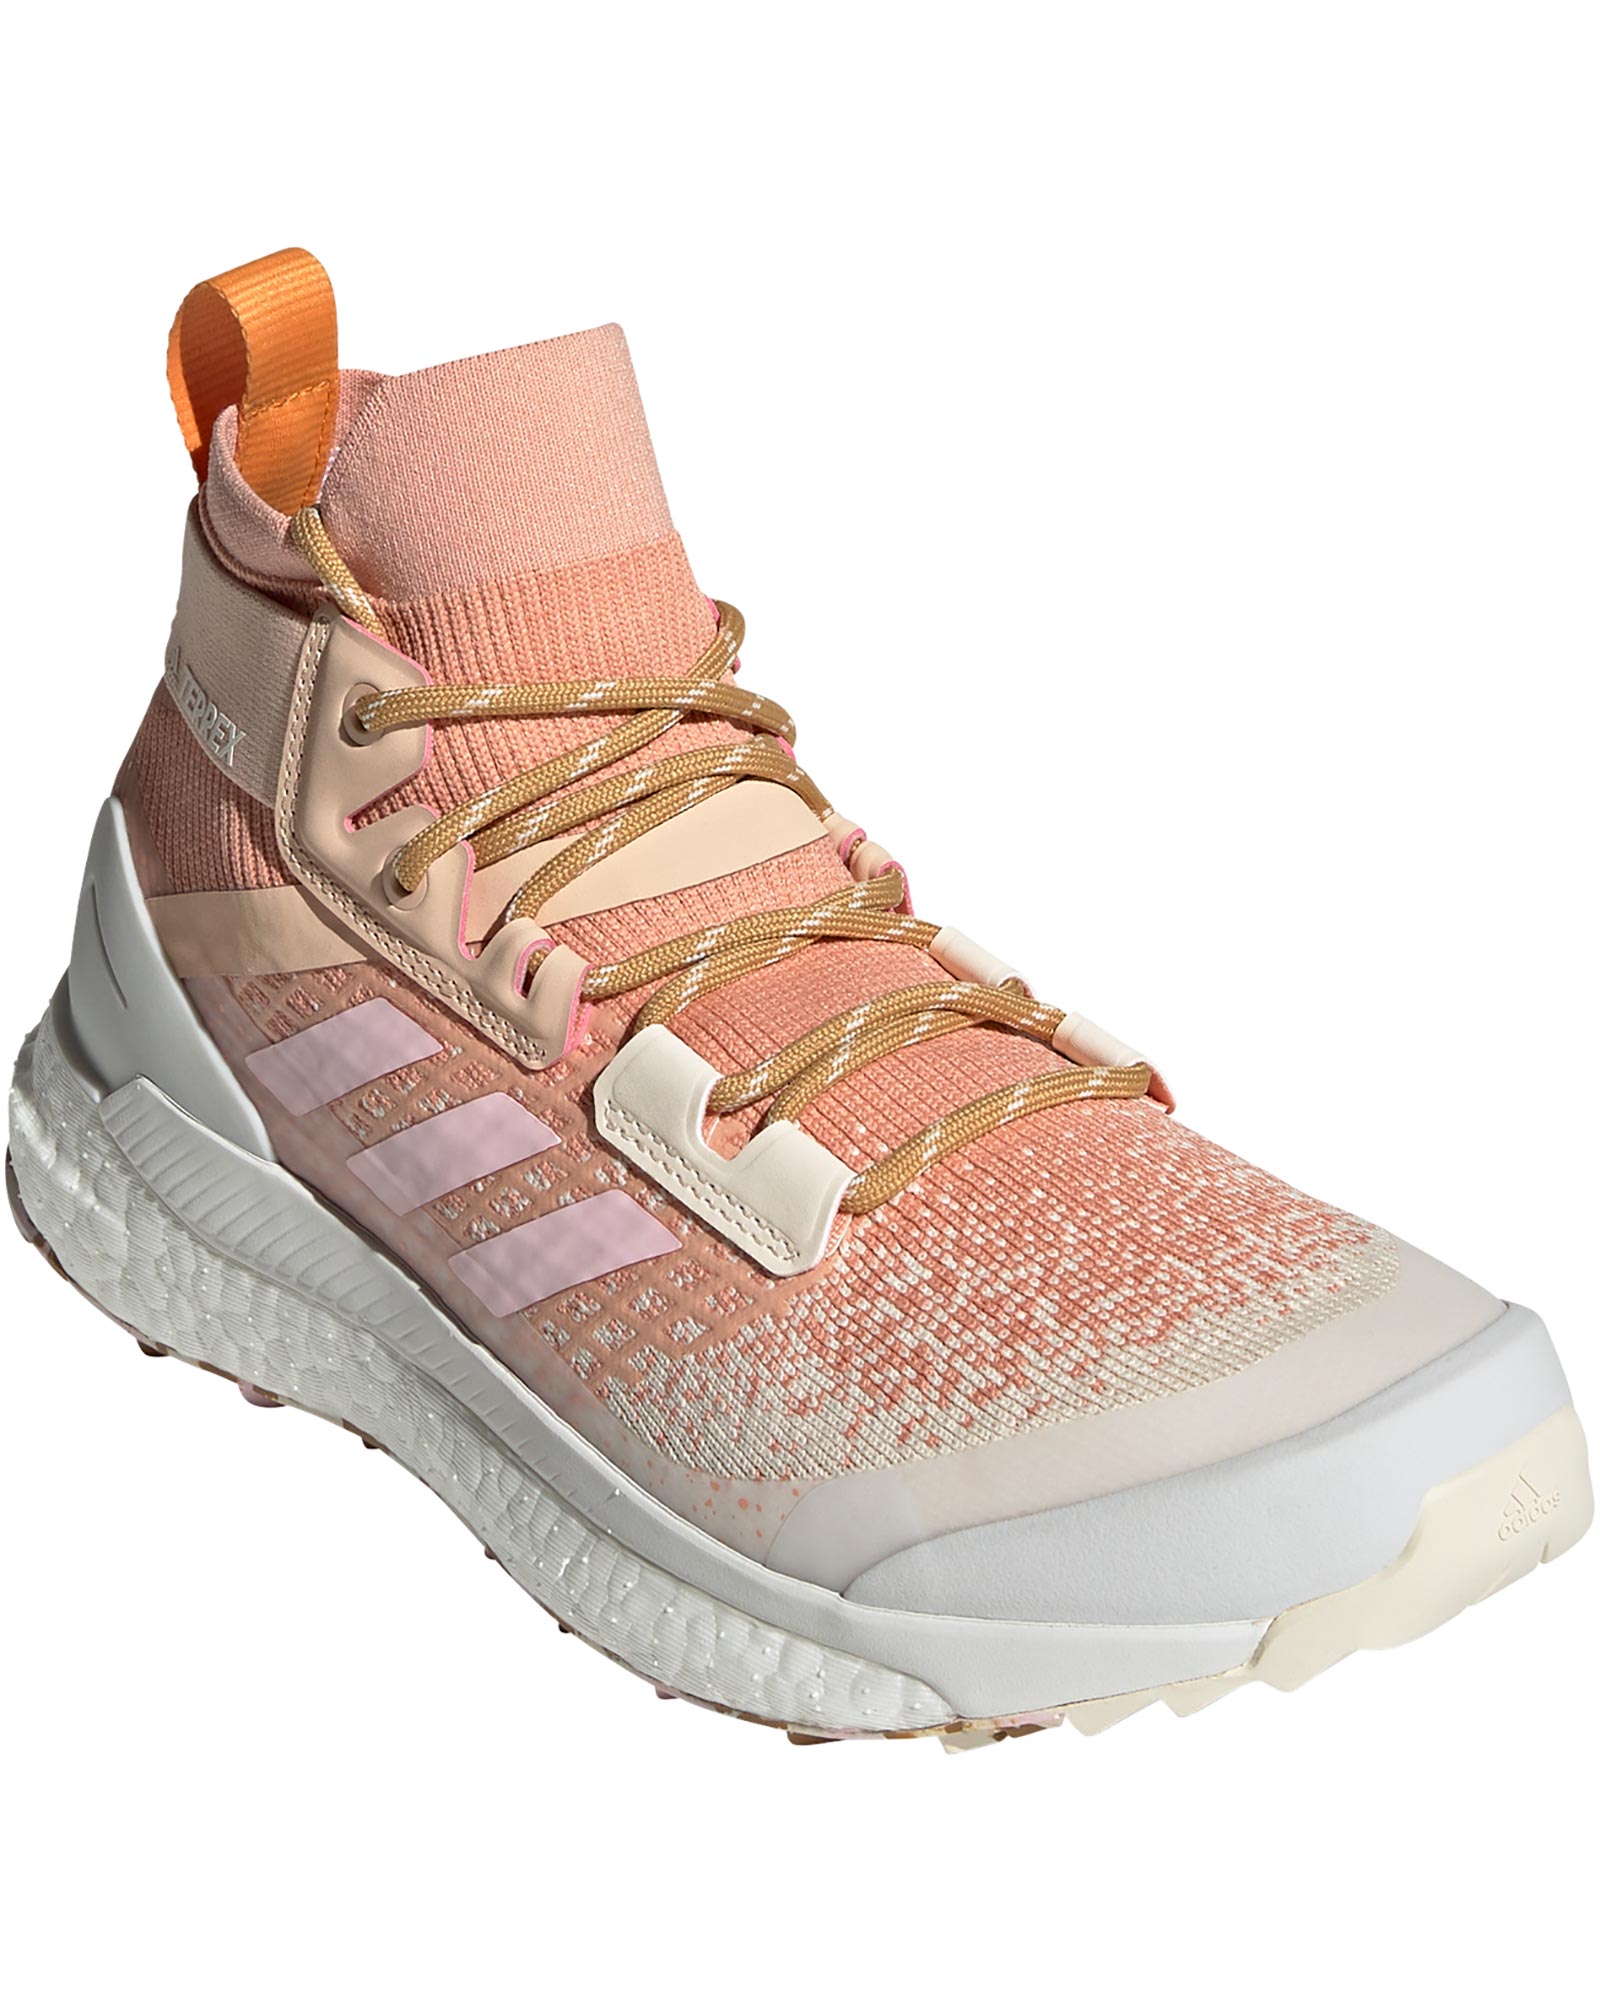 Product image of adidas Terrex Free Hiker Primeblue Women's Boots